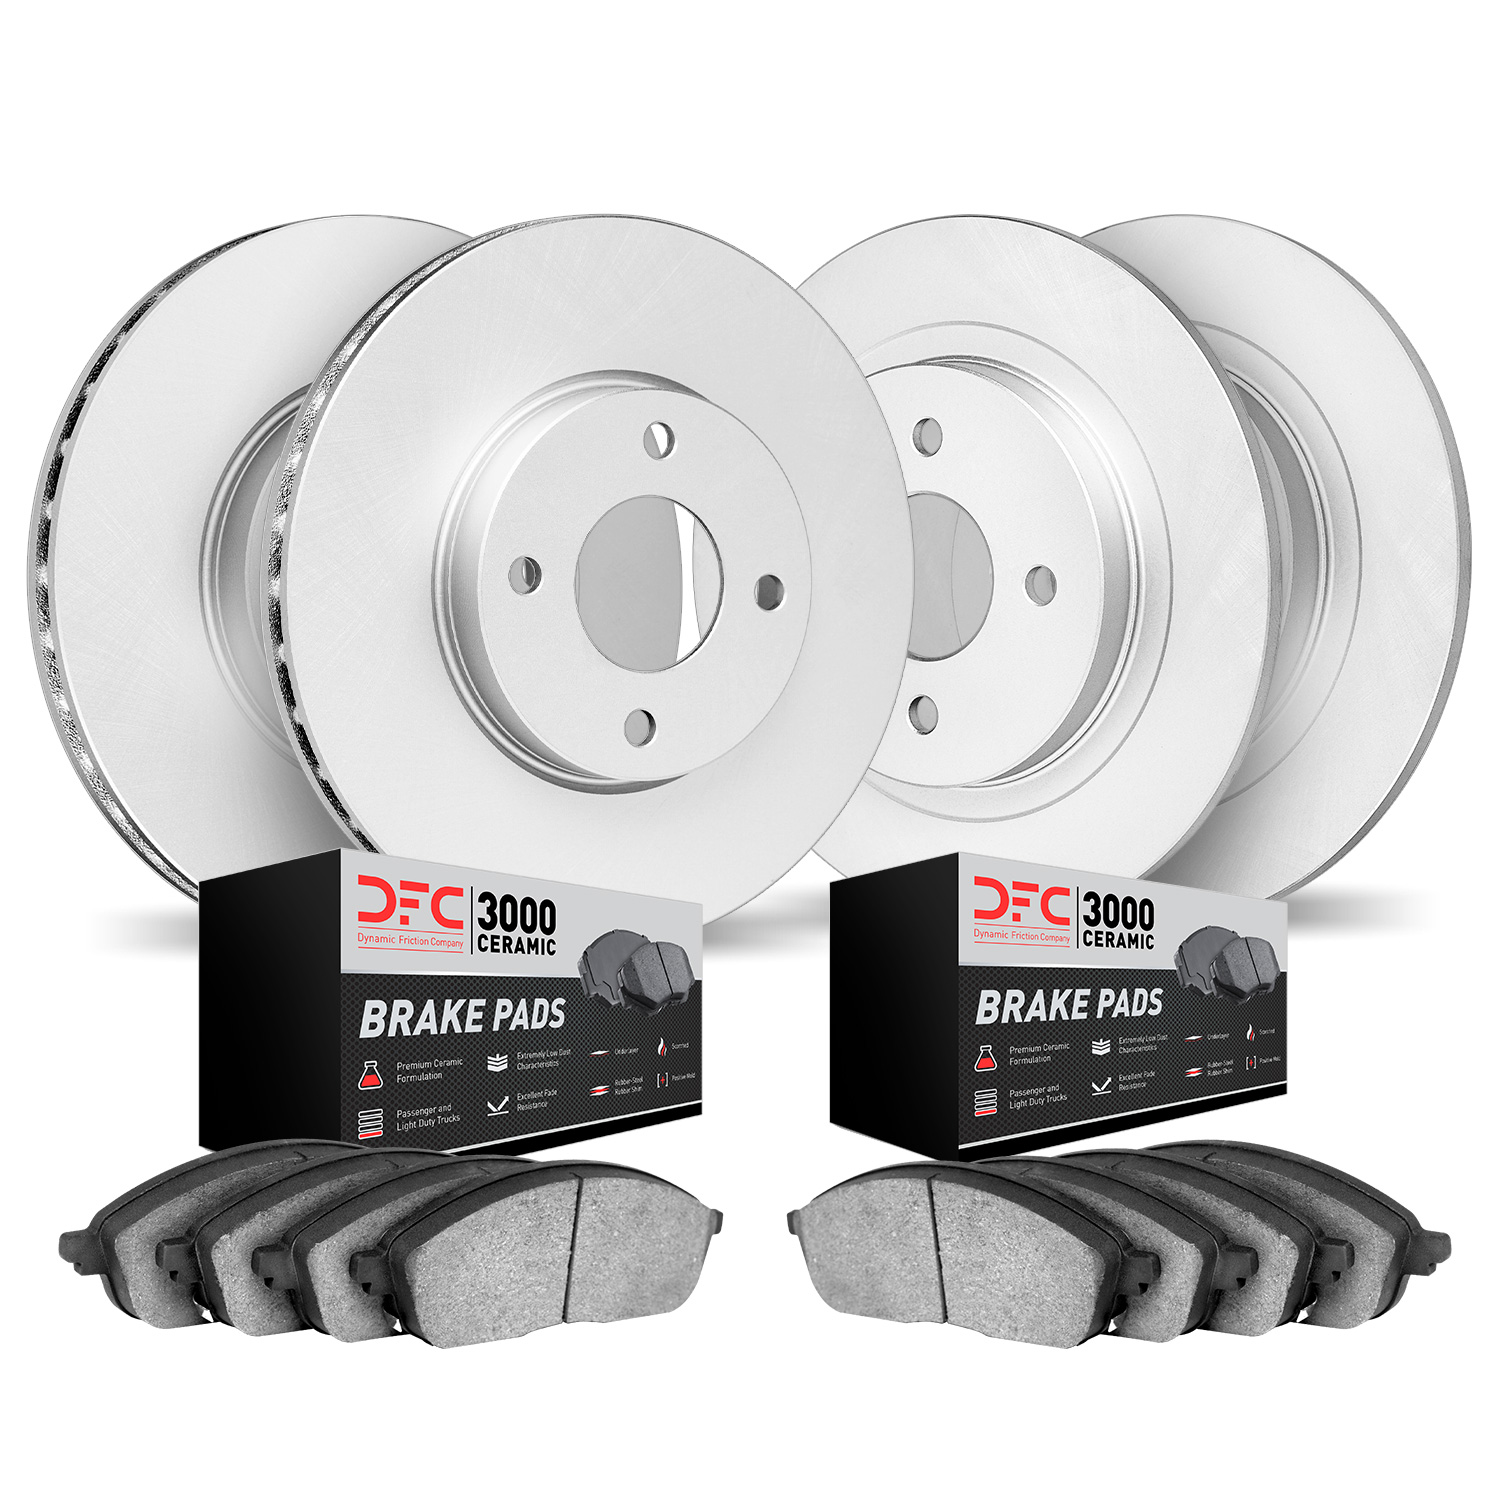 4304-67003 Geospec Brake Rotors with 3000-Series Ceramic Brake Pads Kit, 1993-2001 Infiniti/Nissan, Position: Front and Rear